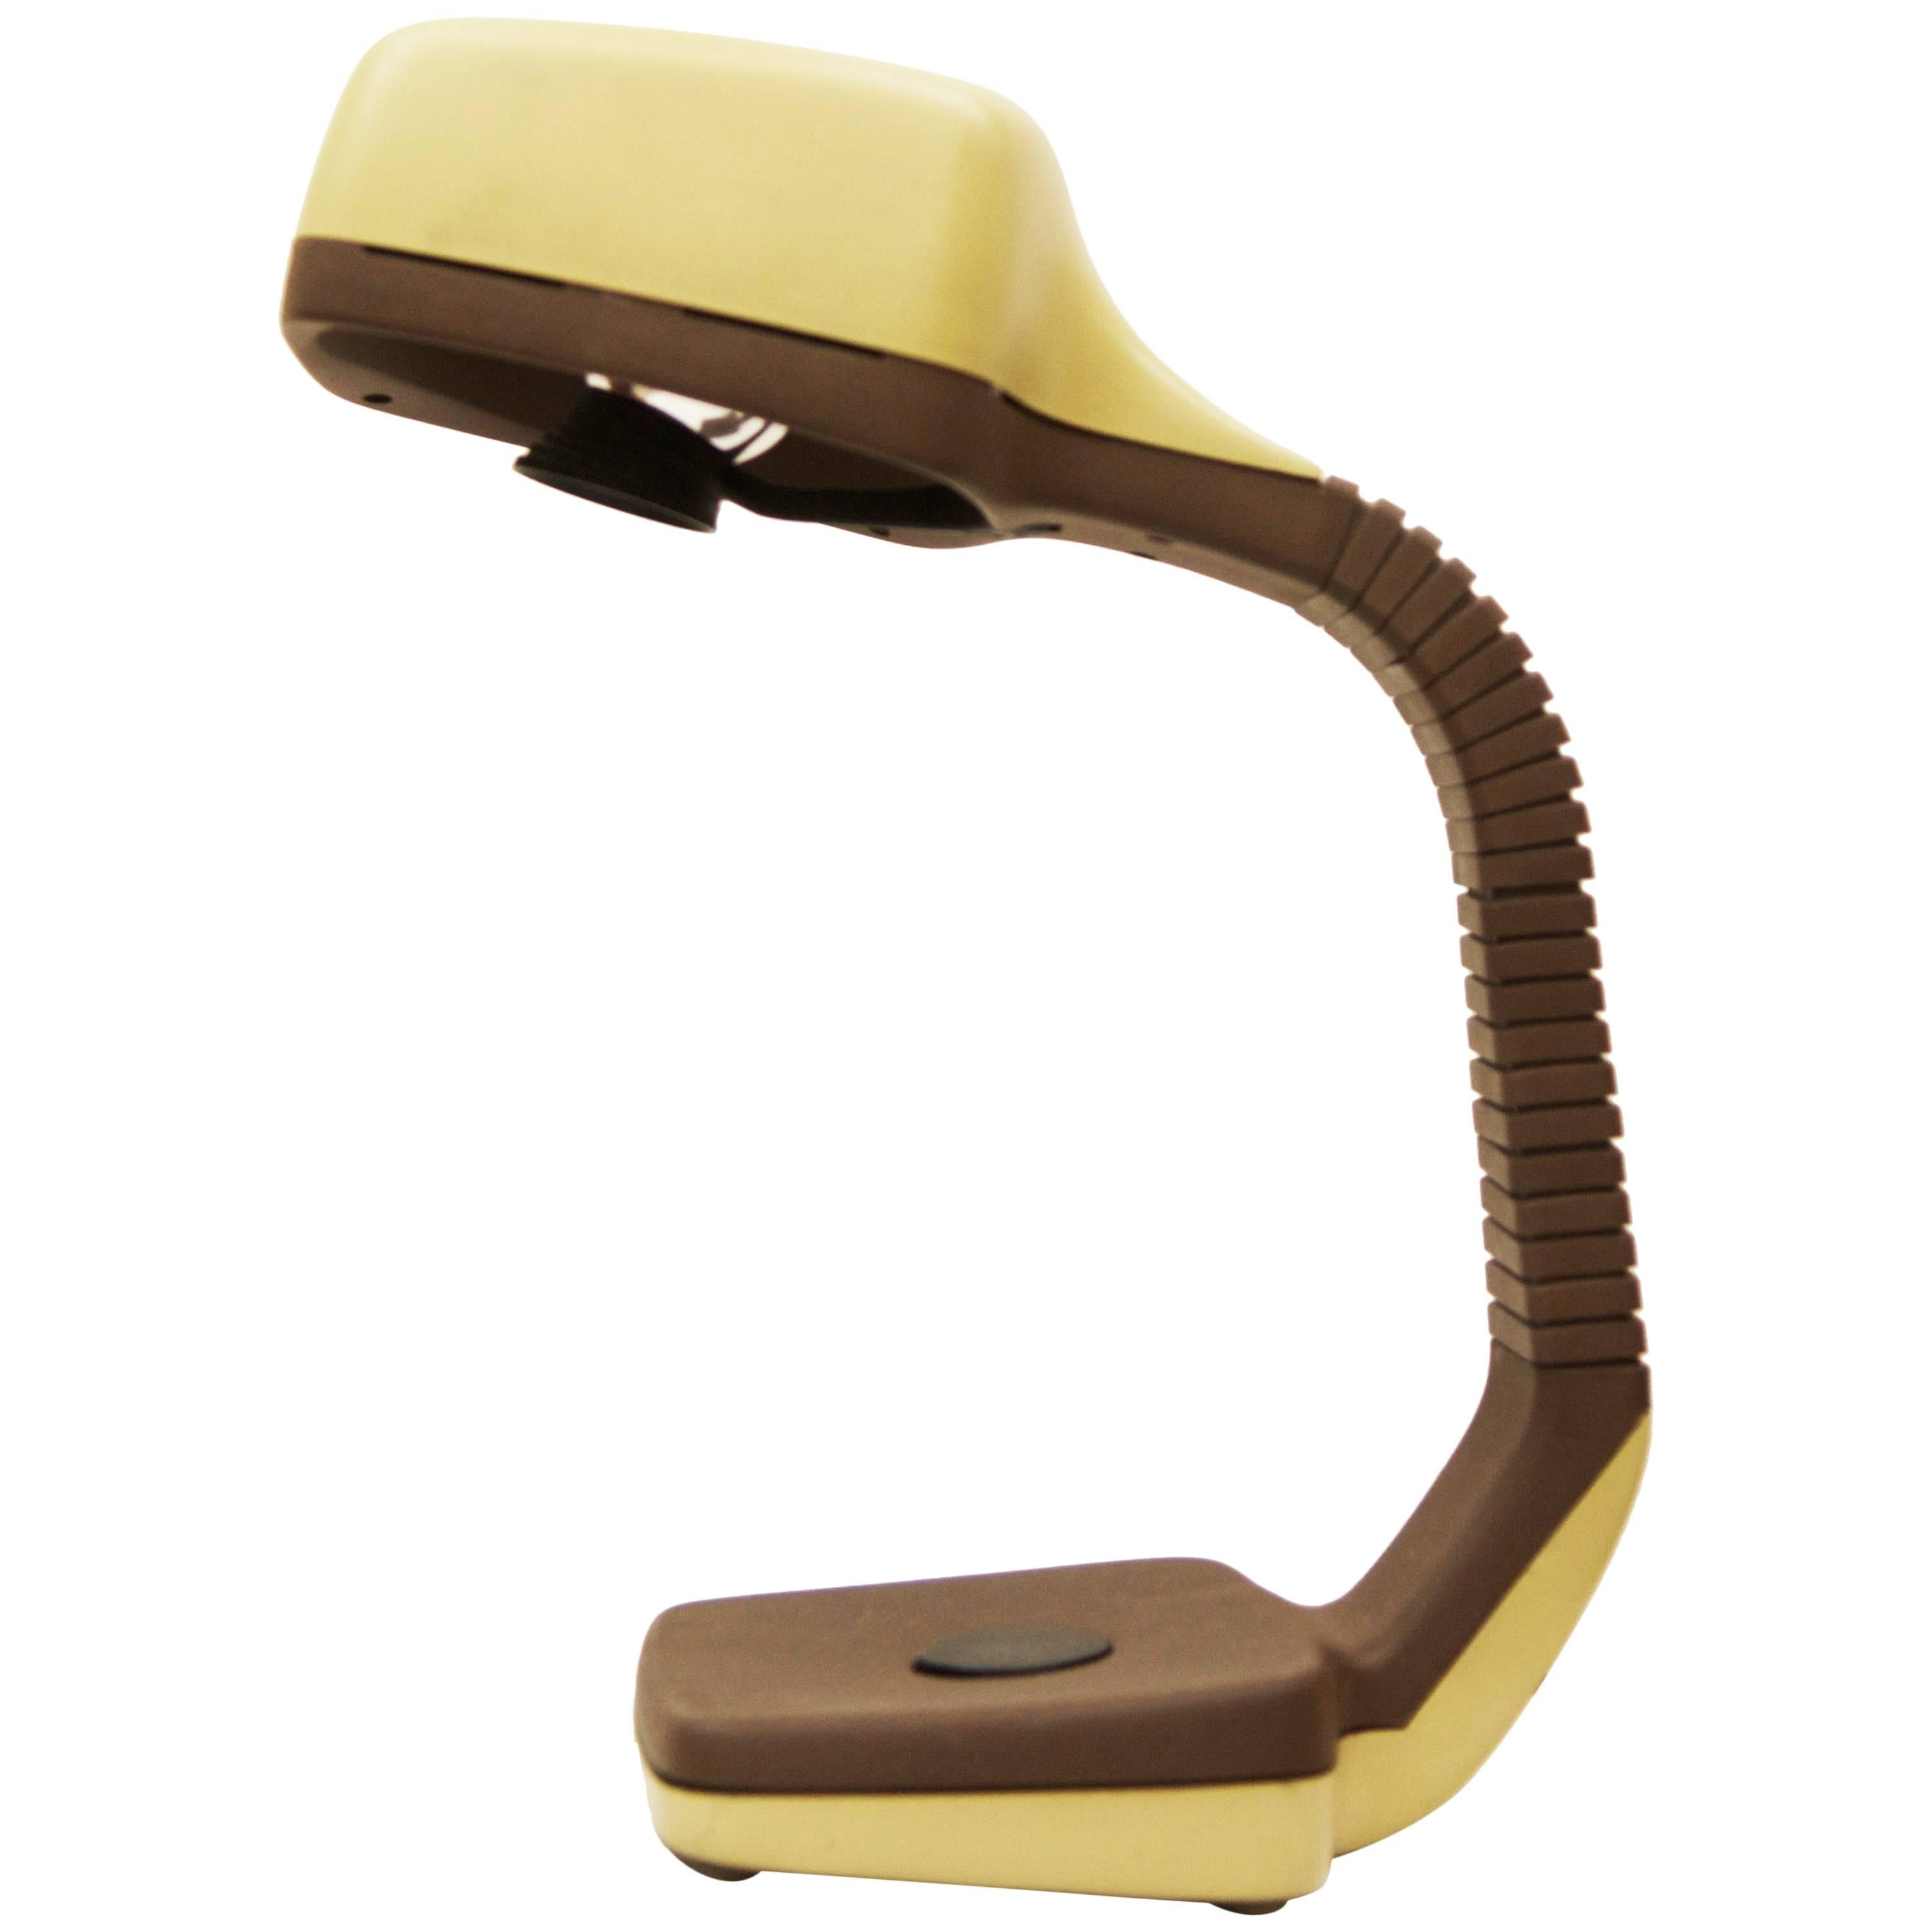 Gooseneck Desk Lamp By Hoffmeister From the 1970s-1980s